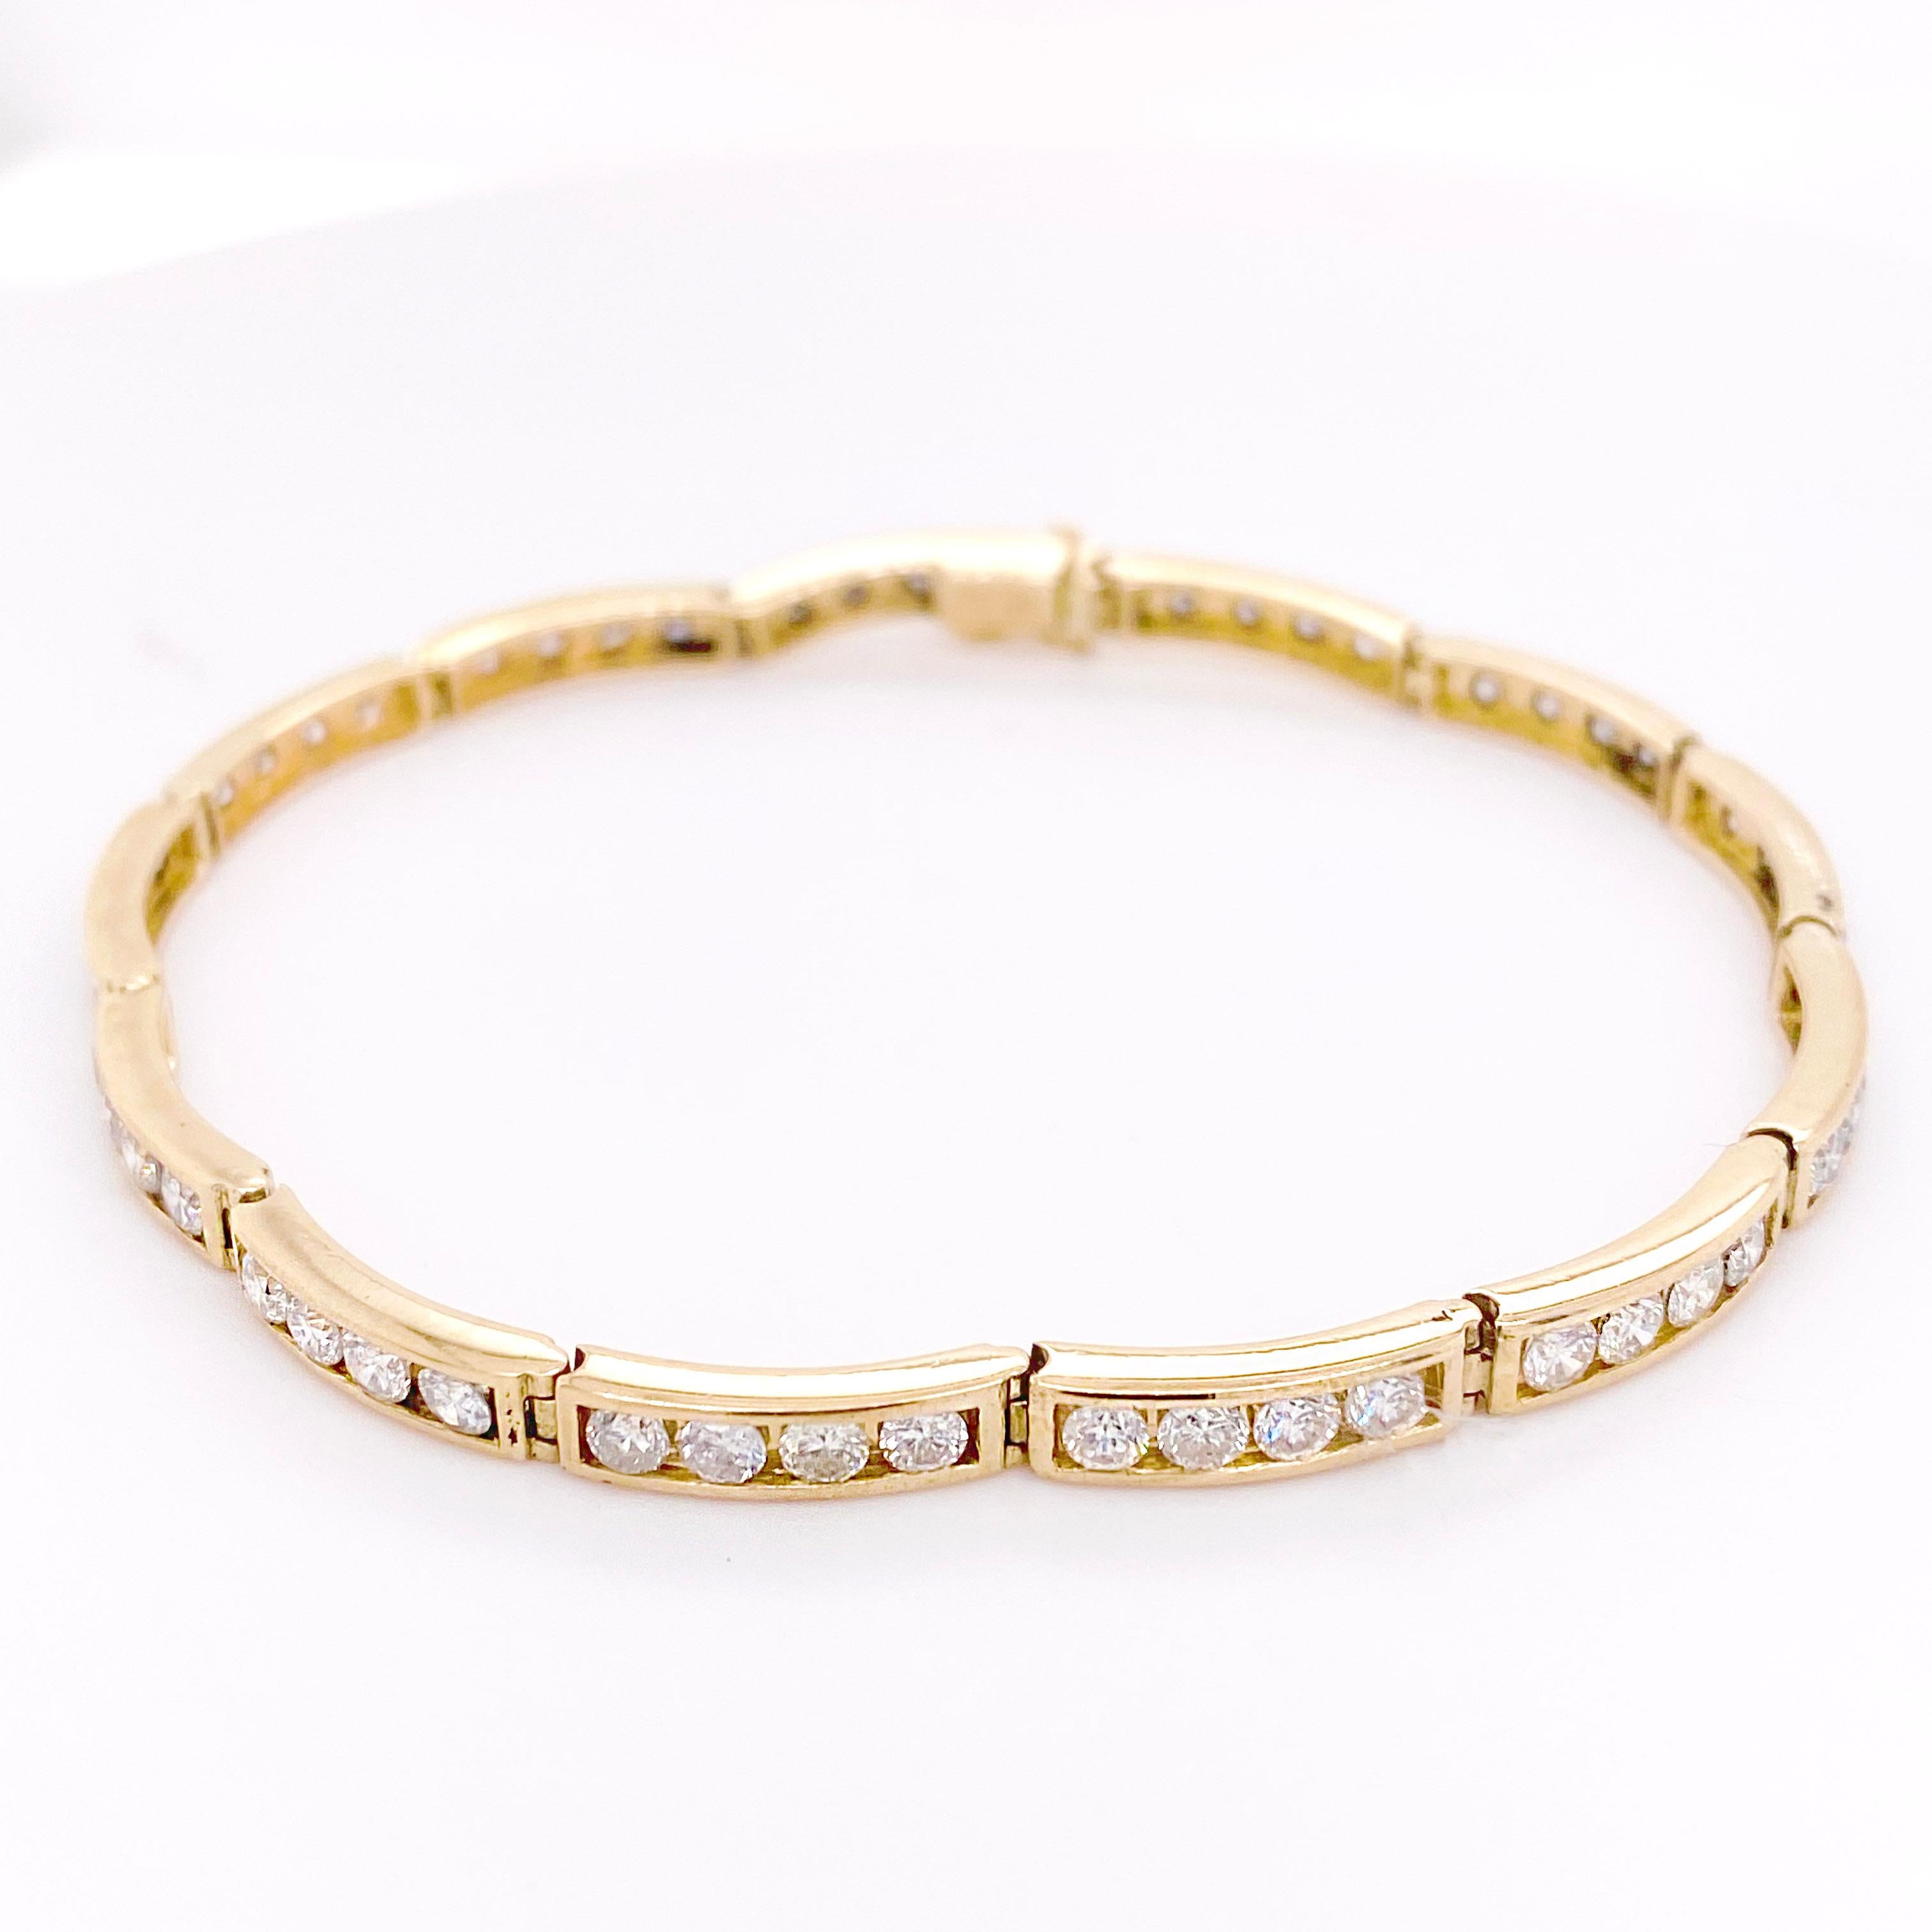 This 14 karat yellow gold tennis bracelet has a total of 2.50 carats of diamonds and measures 7.25 inches long. The design is made of unique curving channels to follow the curve of your wrist as the diamonds nestle securely in the channels. The